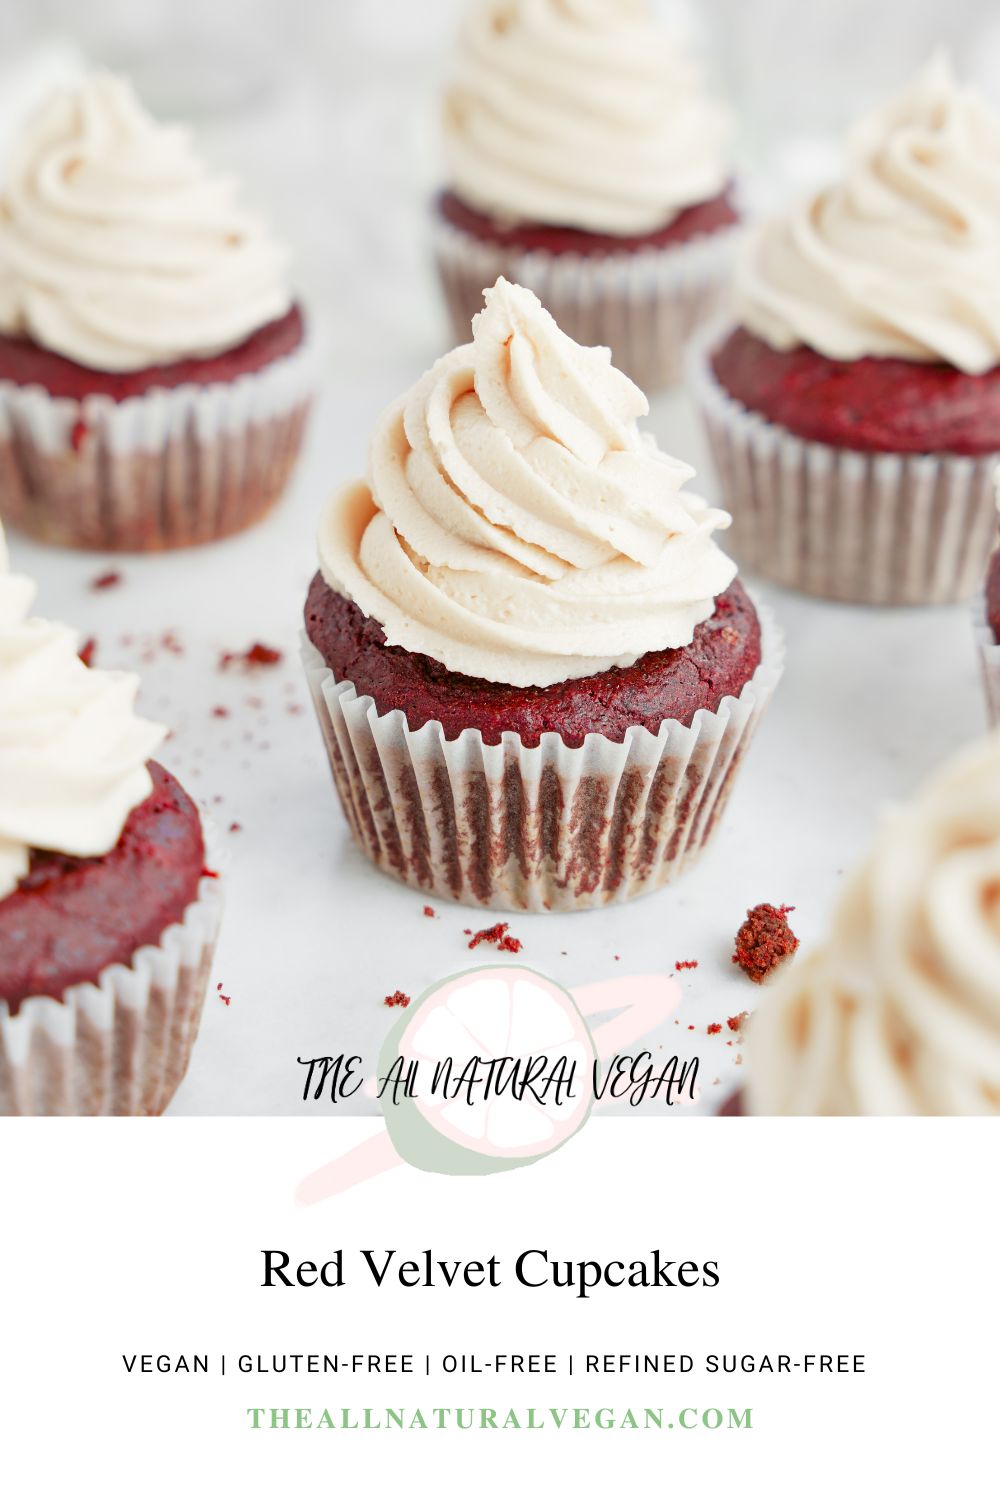 red velvet cupcake recipe card stating this recipe is oil-free, gluten-free, refined sugar-free, and vegan